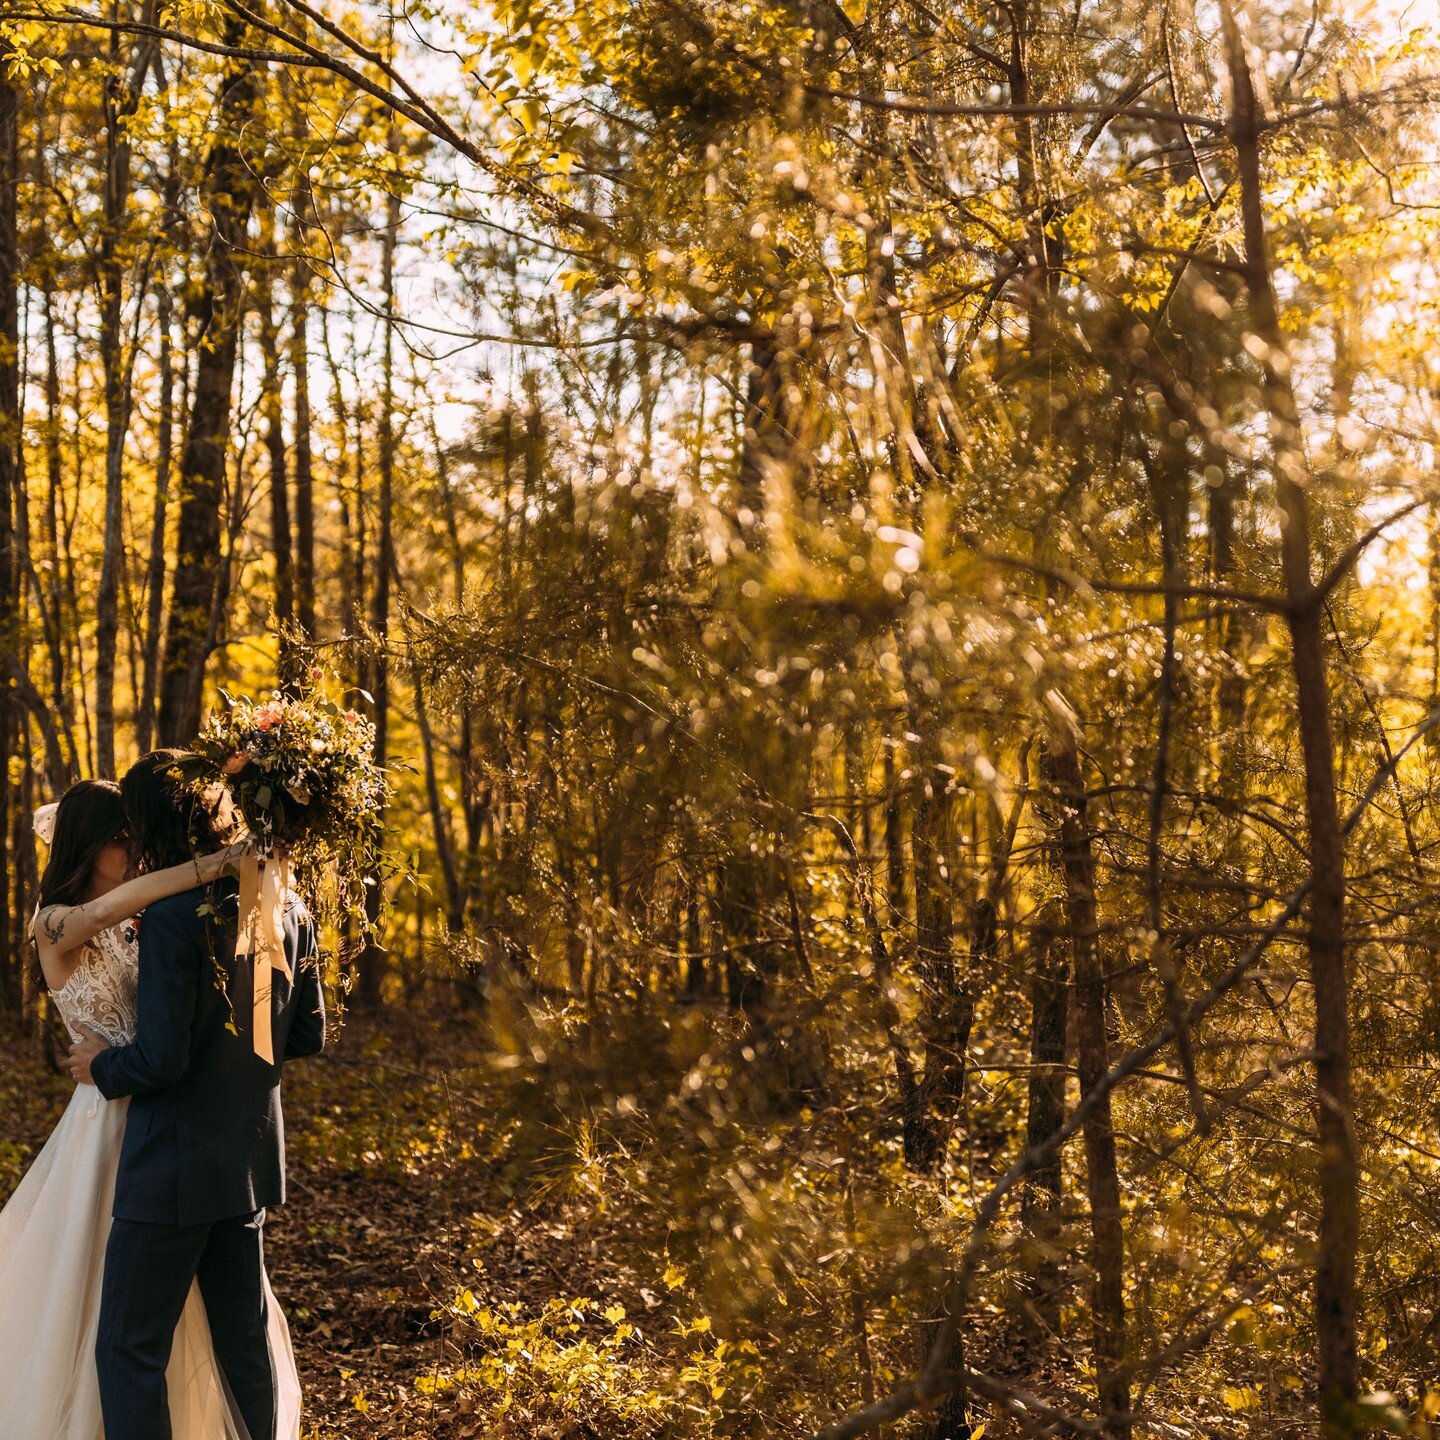 🍁🍂 Fall wedding vibes. . Curious what your fall wedding at BHG could look like?? Just check out this beautiful couples pics! 

Photos: Jim Wright
Bradfordhouseandgardens.com

#gardenwedding #fallwedding #bradfordhouseandgardens #bradfordhouse #atlv